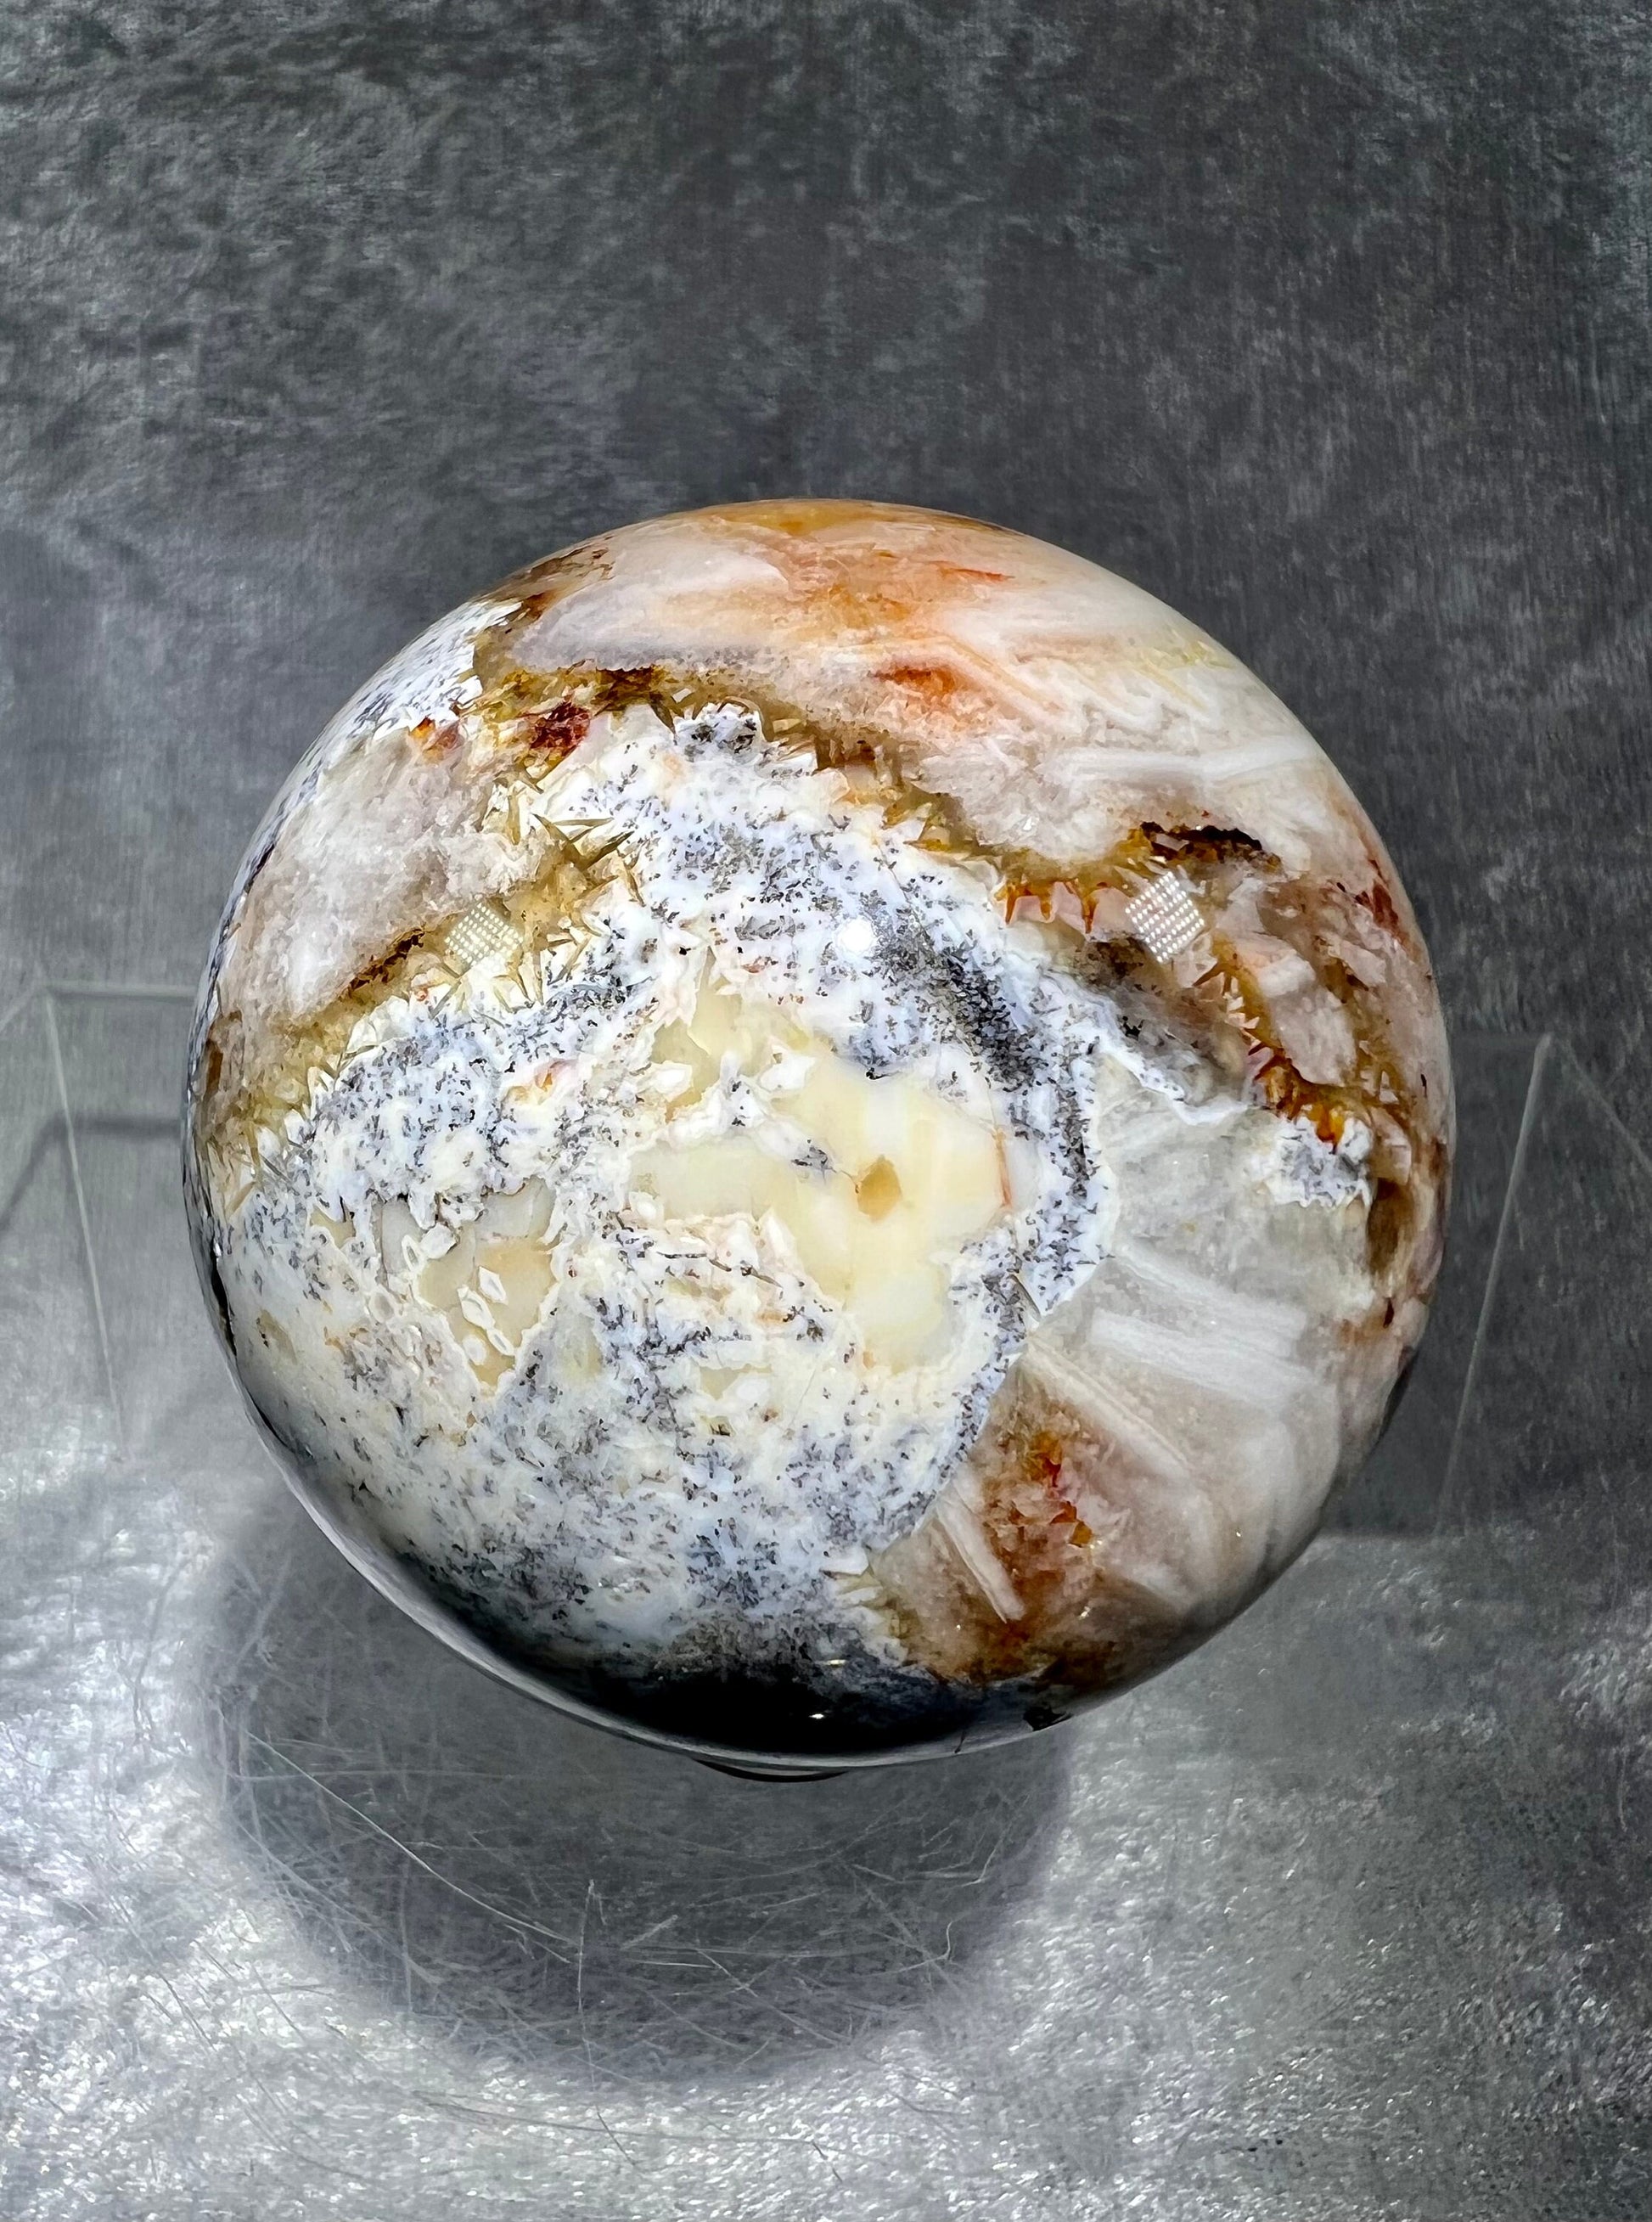 Beautiful Brecciated Mookaite Sphere. 59mm. Very Rare Crystal. Incredible Colors And Patterns.